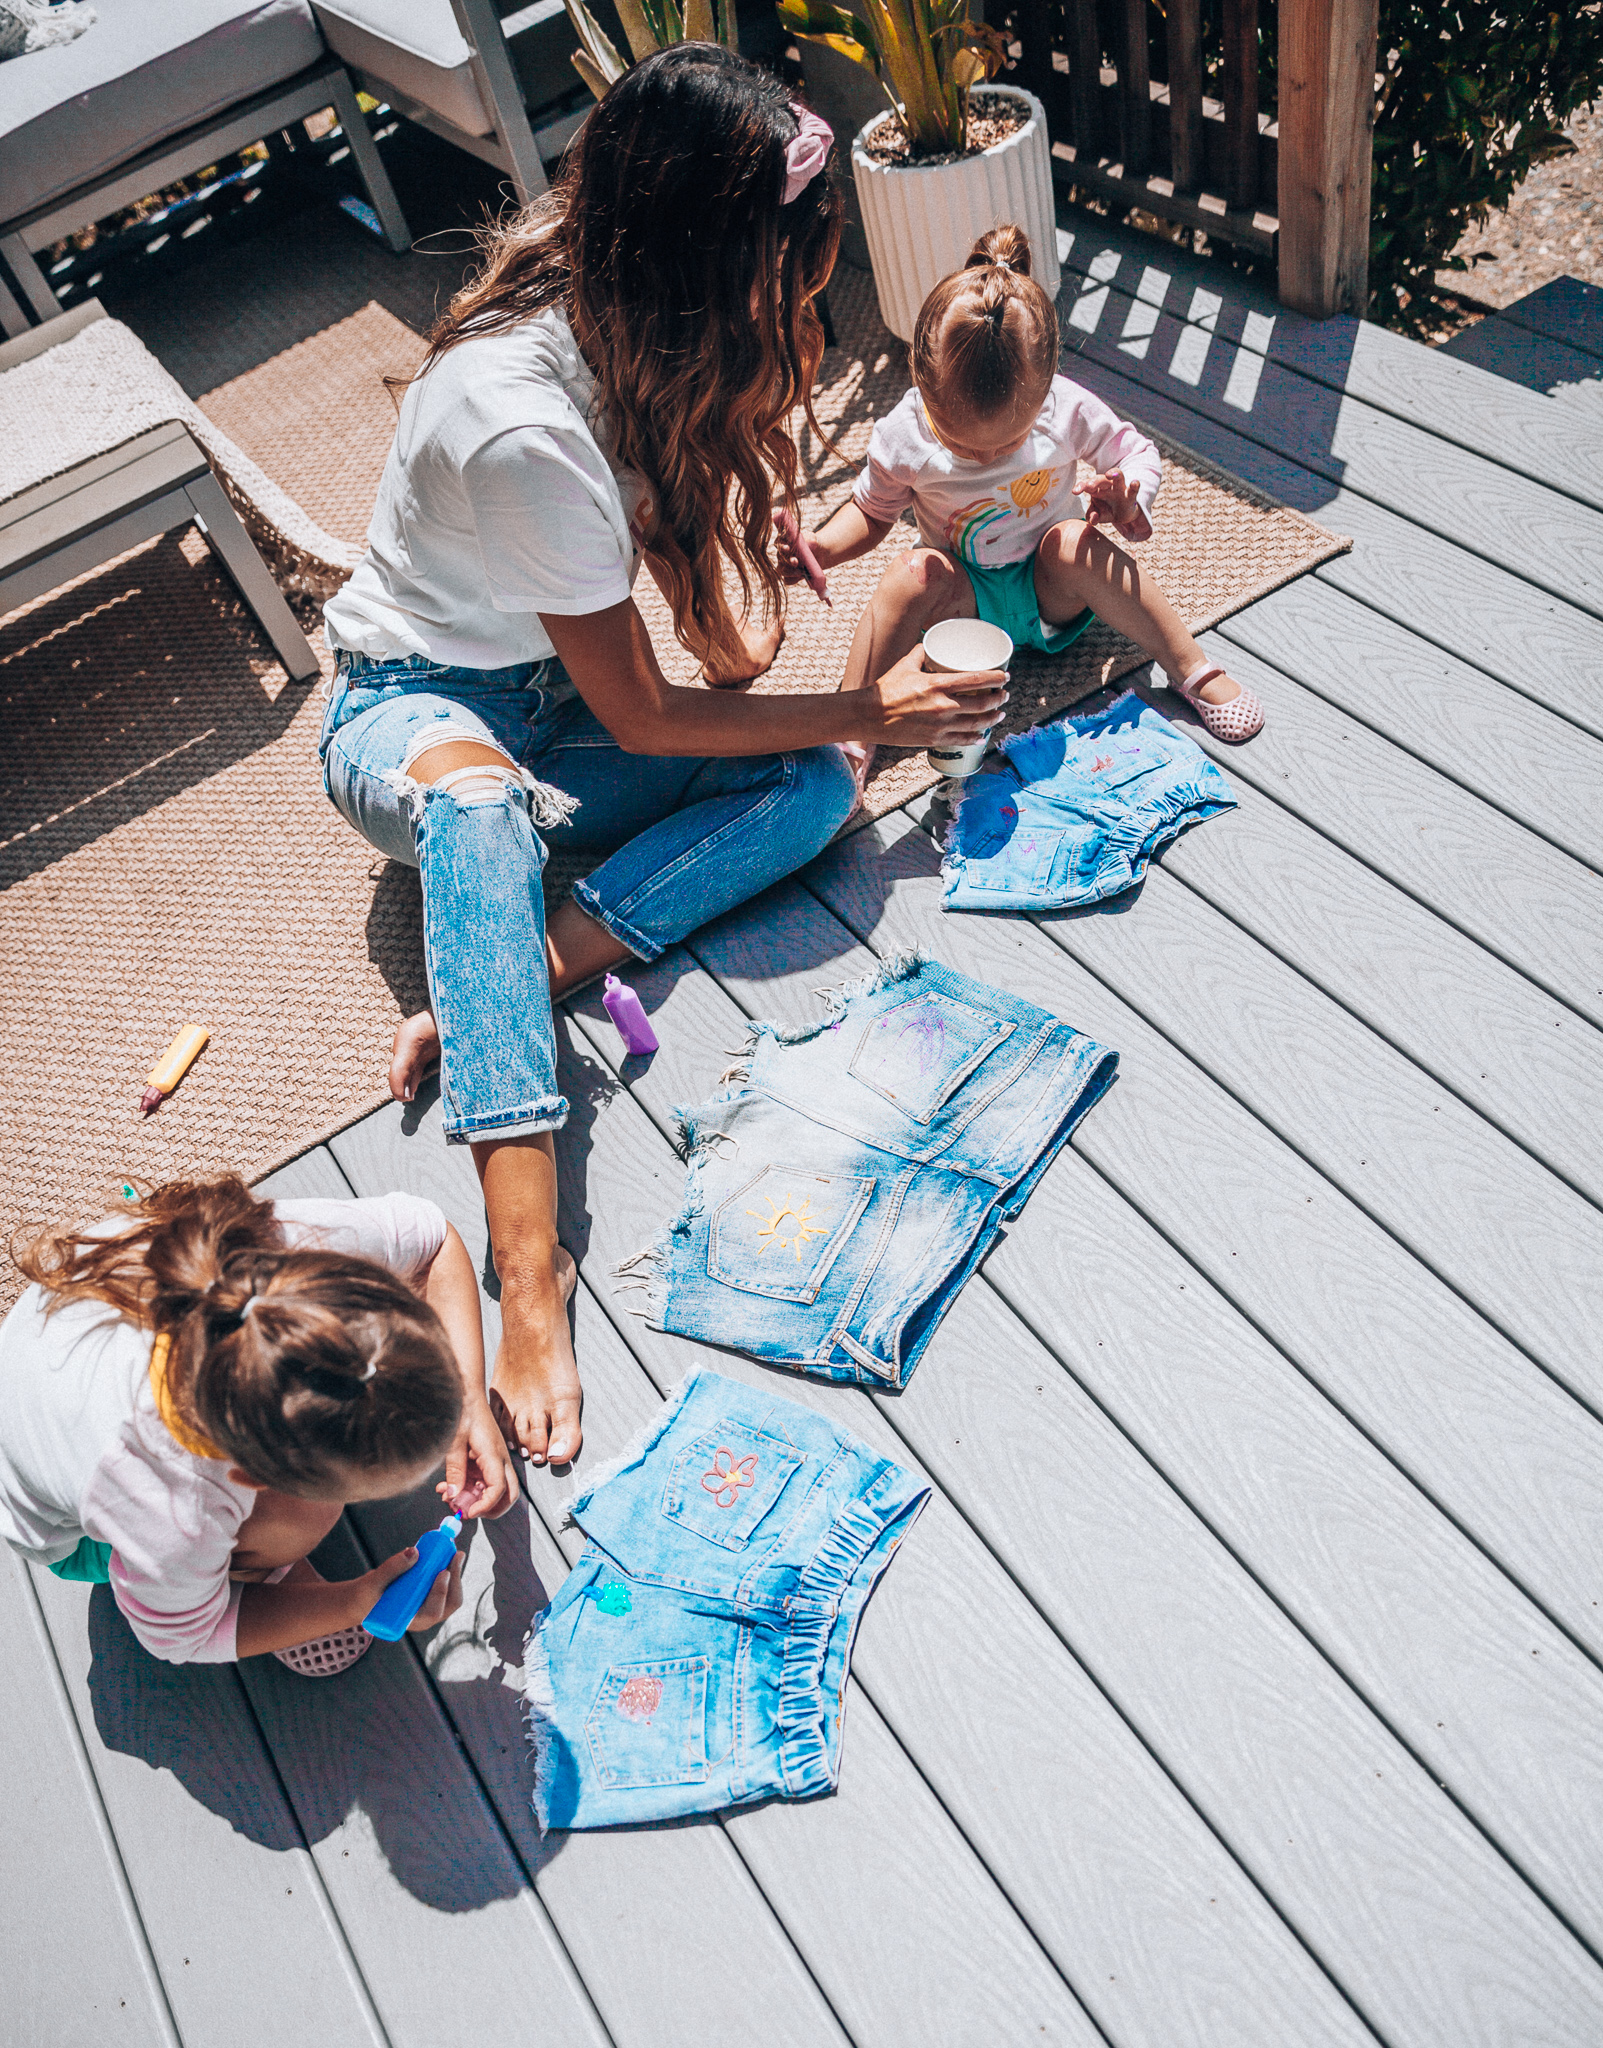 The Girl in the Yellow Dress | Latisha Springer | Fun Summer Activities for Kids by top US mom blog, The Girl in the Yellow Dress: image mom with young girl sitting on back porch deck decorating cutoff denim shorts with puff paint.